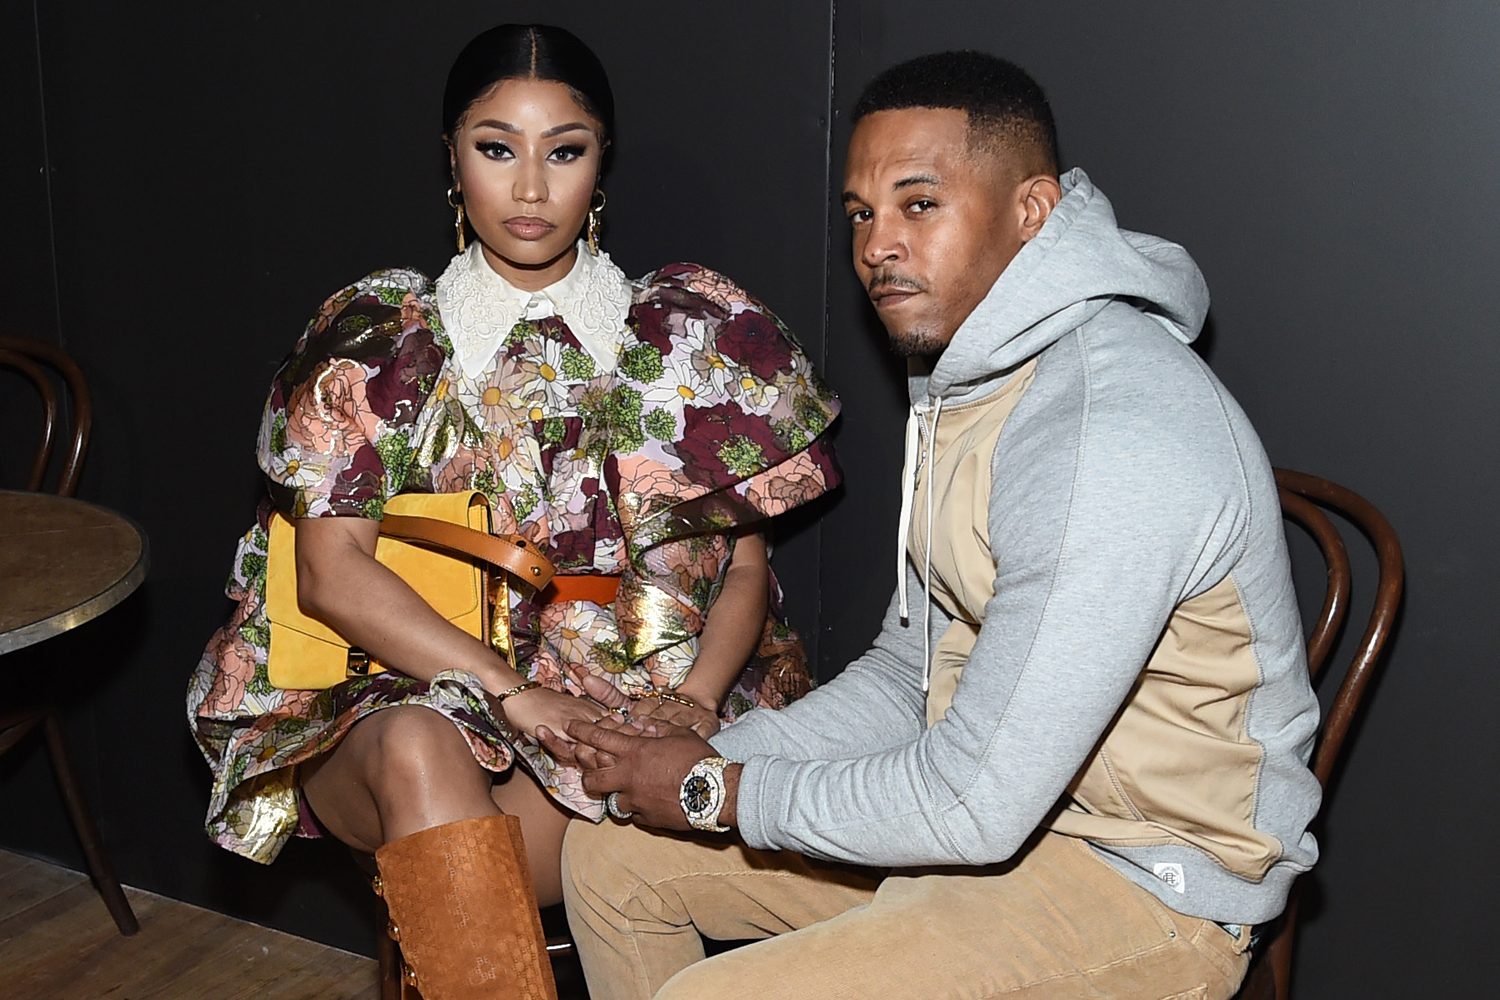 Nicki Minaj's husband, Kenneth Petty, pleads guilty to failing to register as a sex offender in California